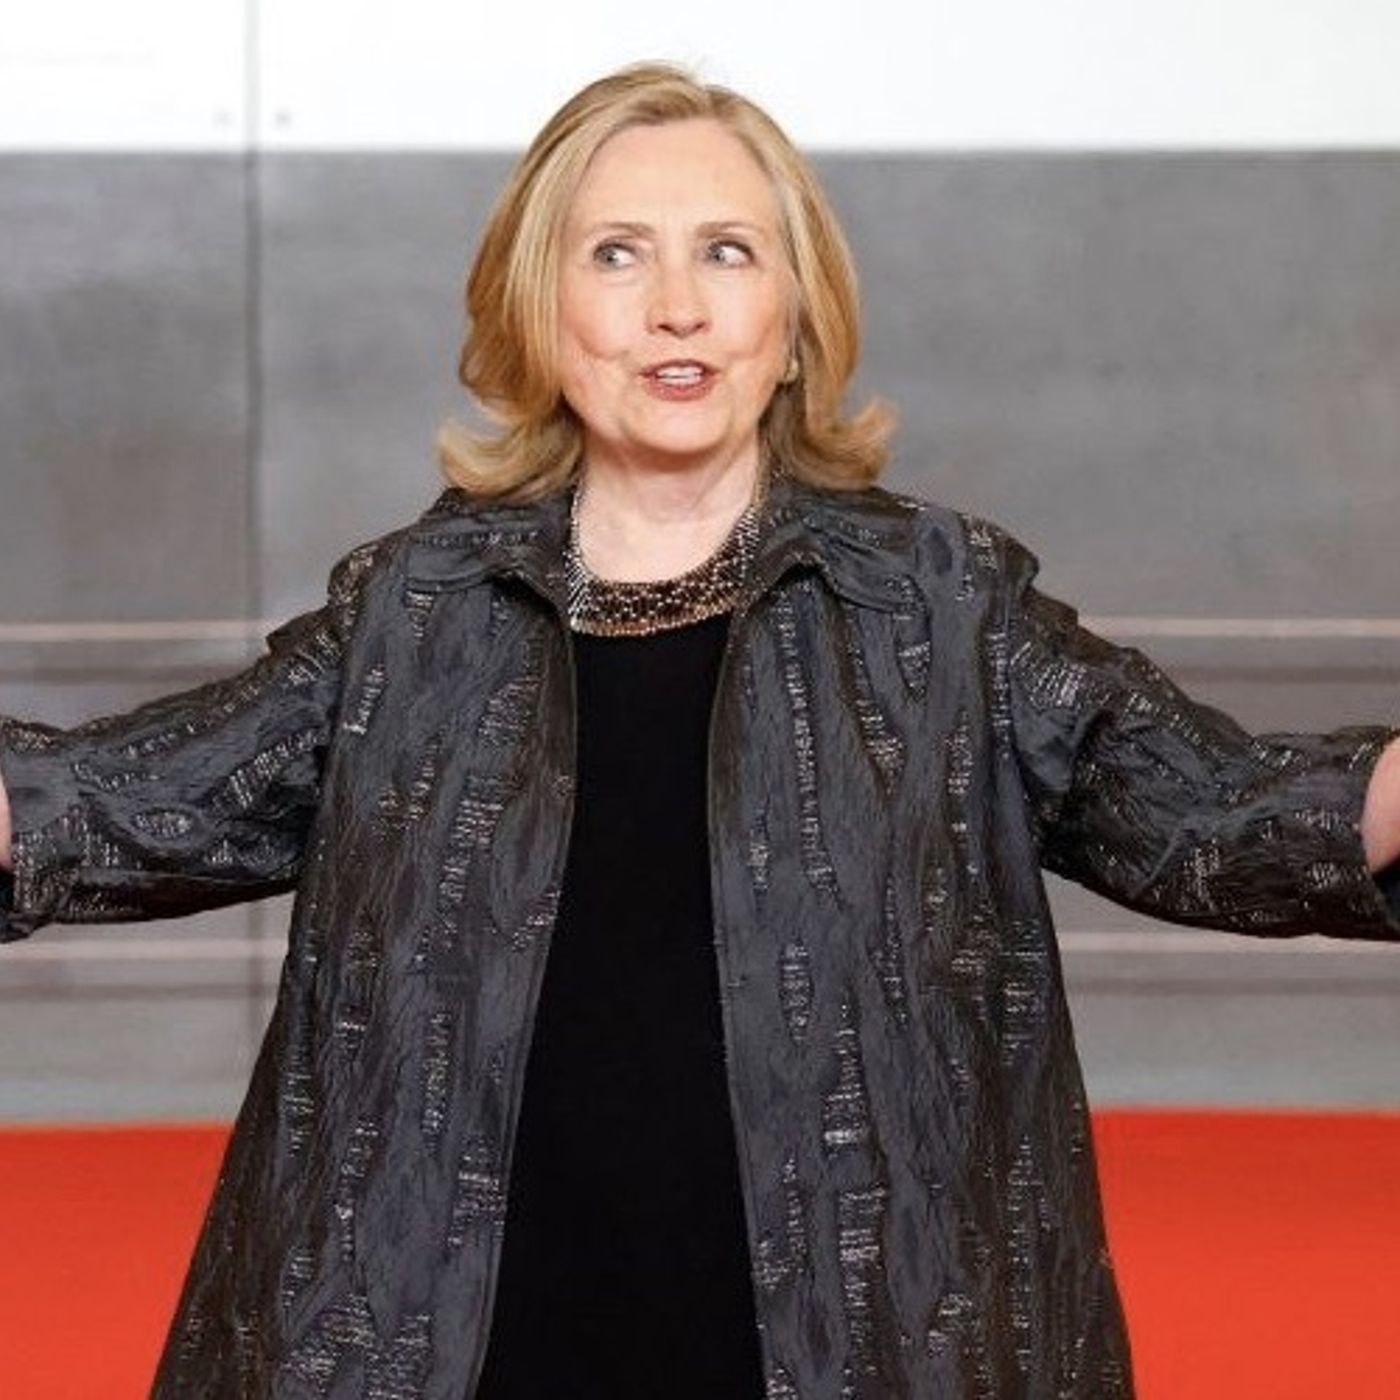 Will Hillary Clinton be back for more in 2024?